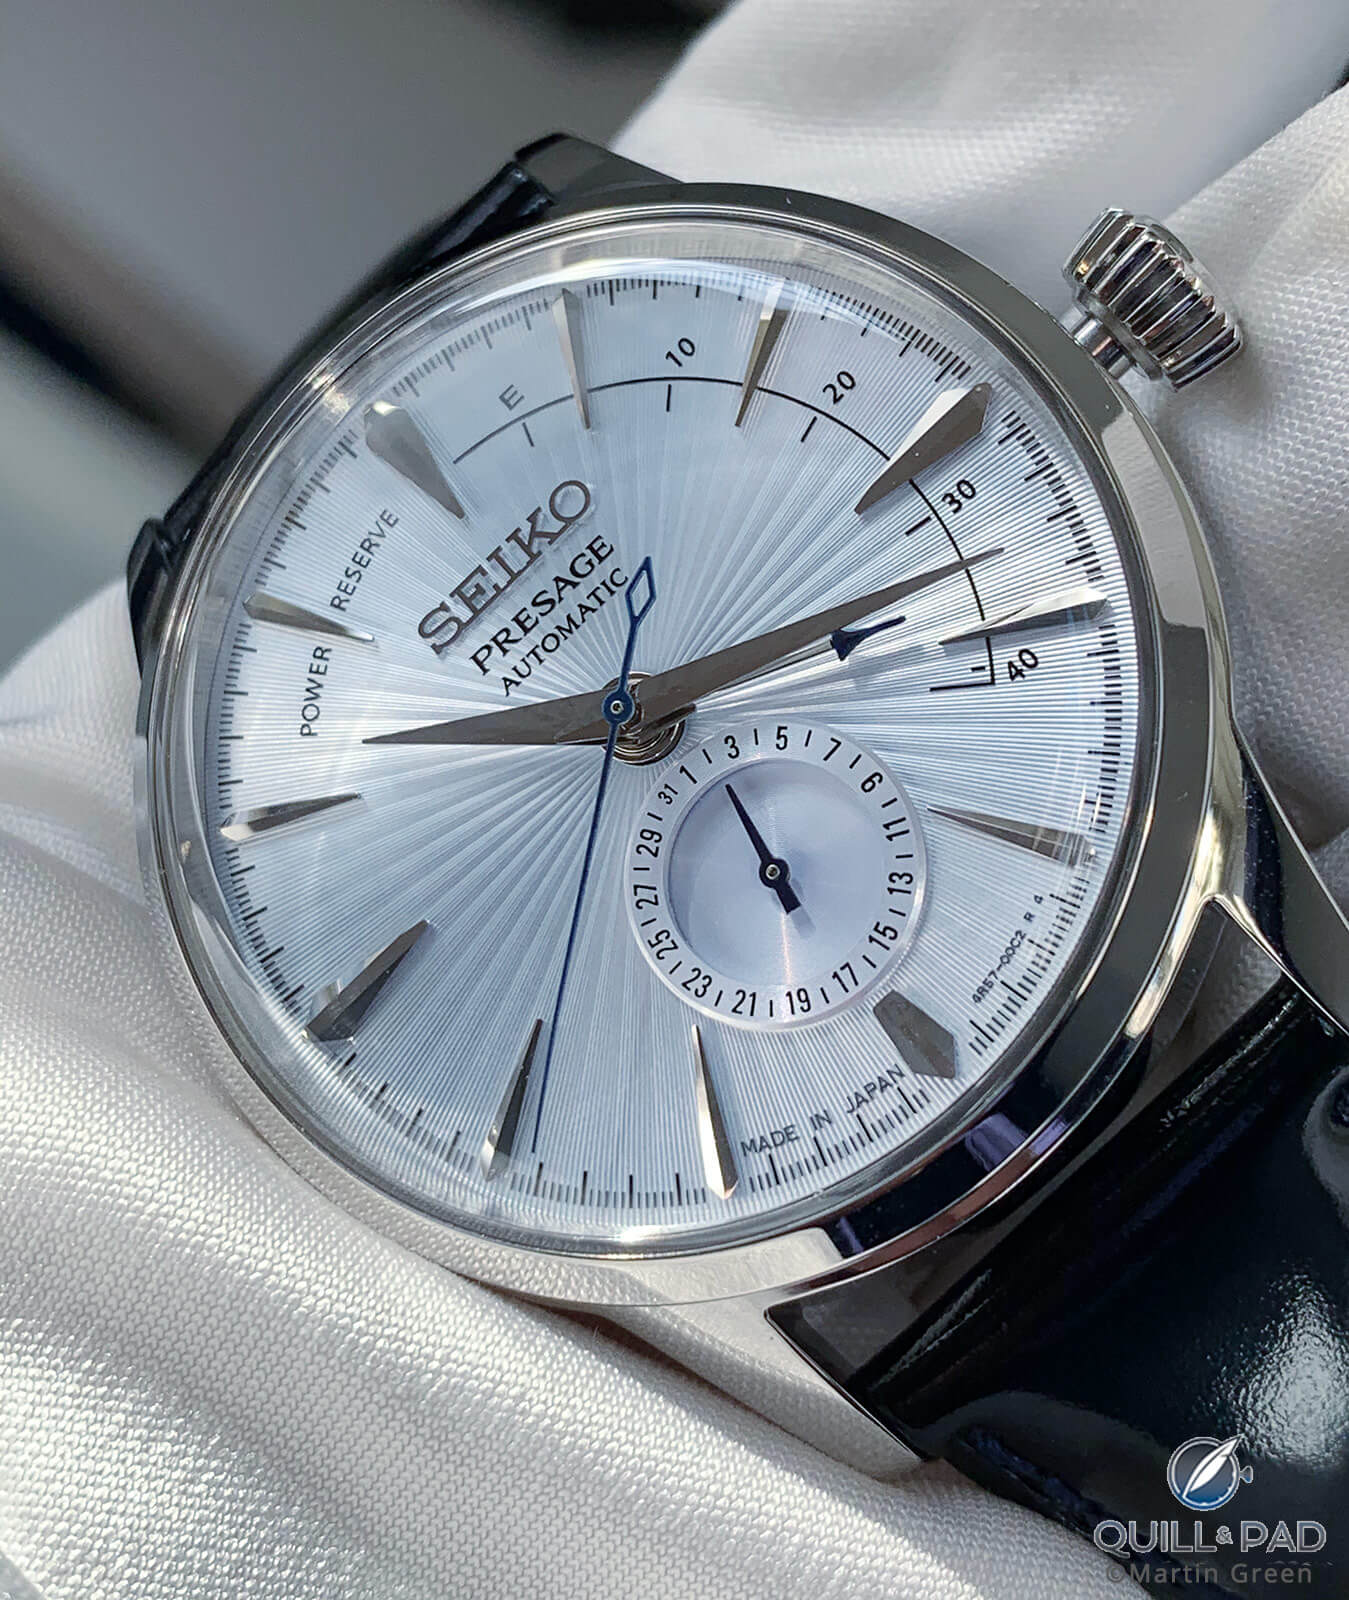 Seiko Presage: A 2020 Overview With Some New Watches - Quill & Pad